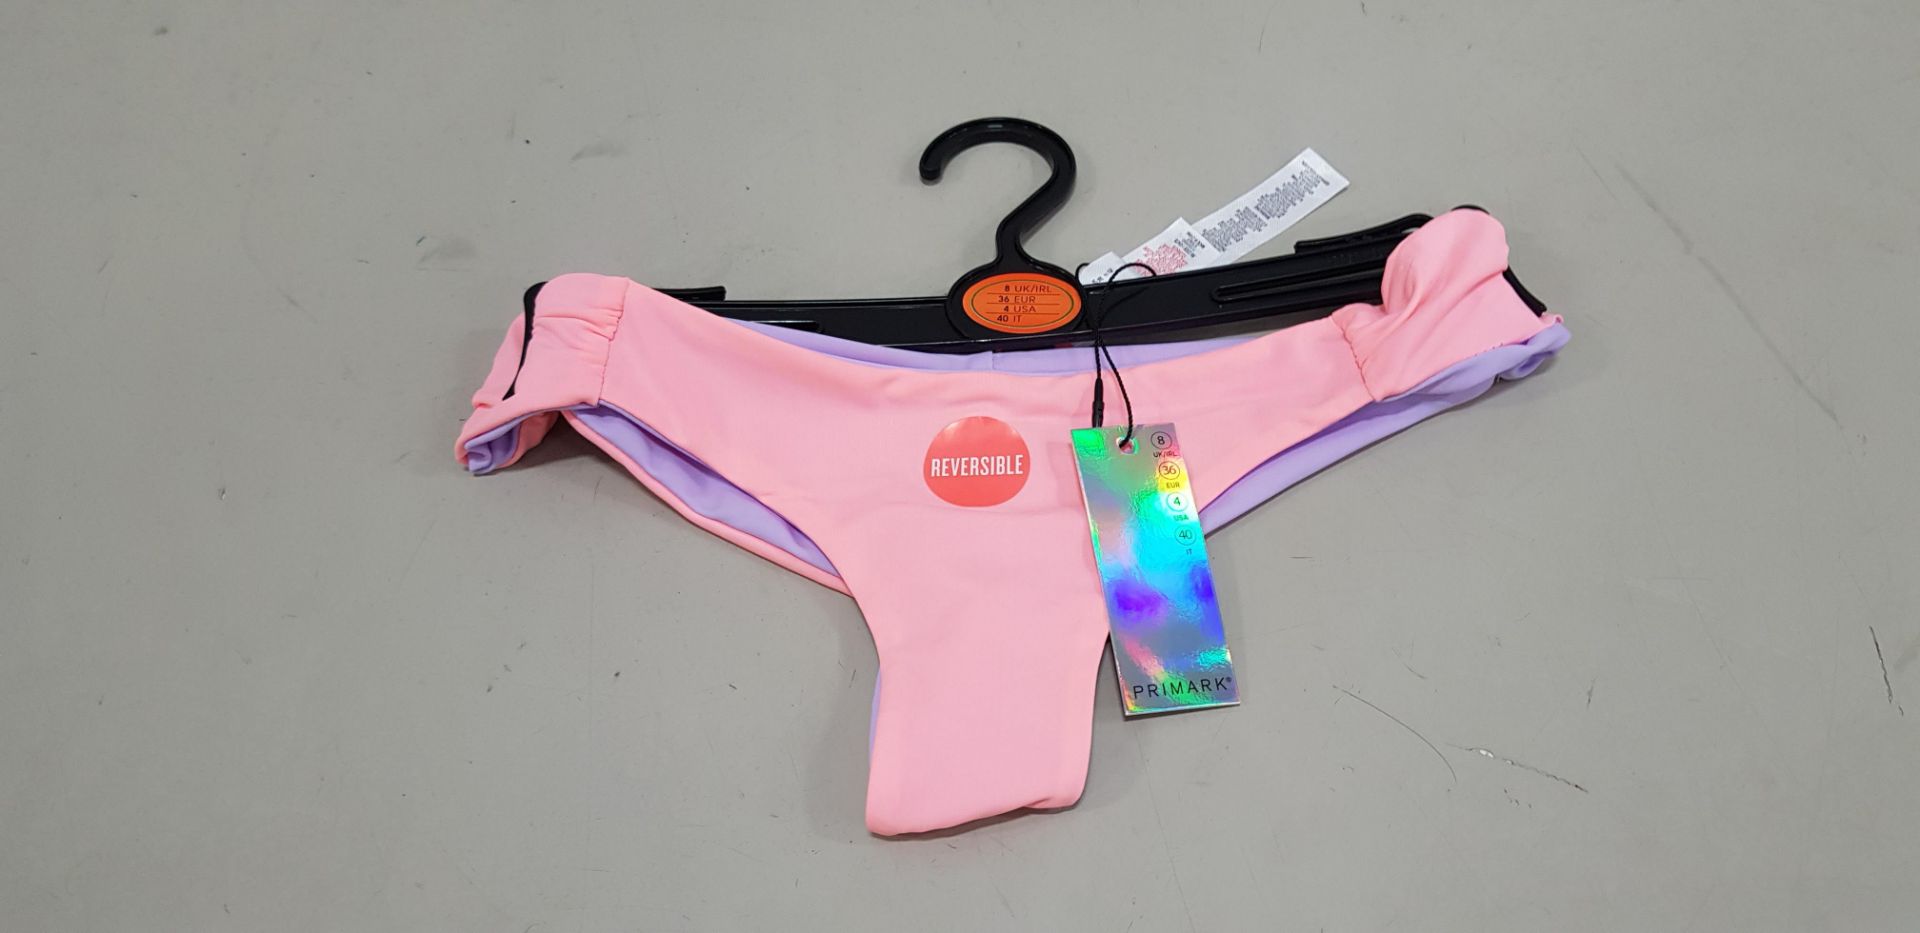 120 X BRAND NEW PRIMARK REVERSIBLE CORAL AND LILAC BIKINI BOTTOMS IN ALL RATIO SIZES 6-18 RRP €5.